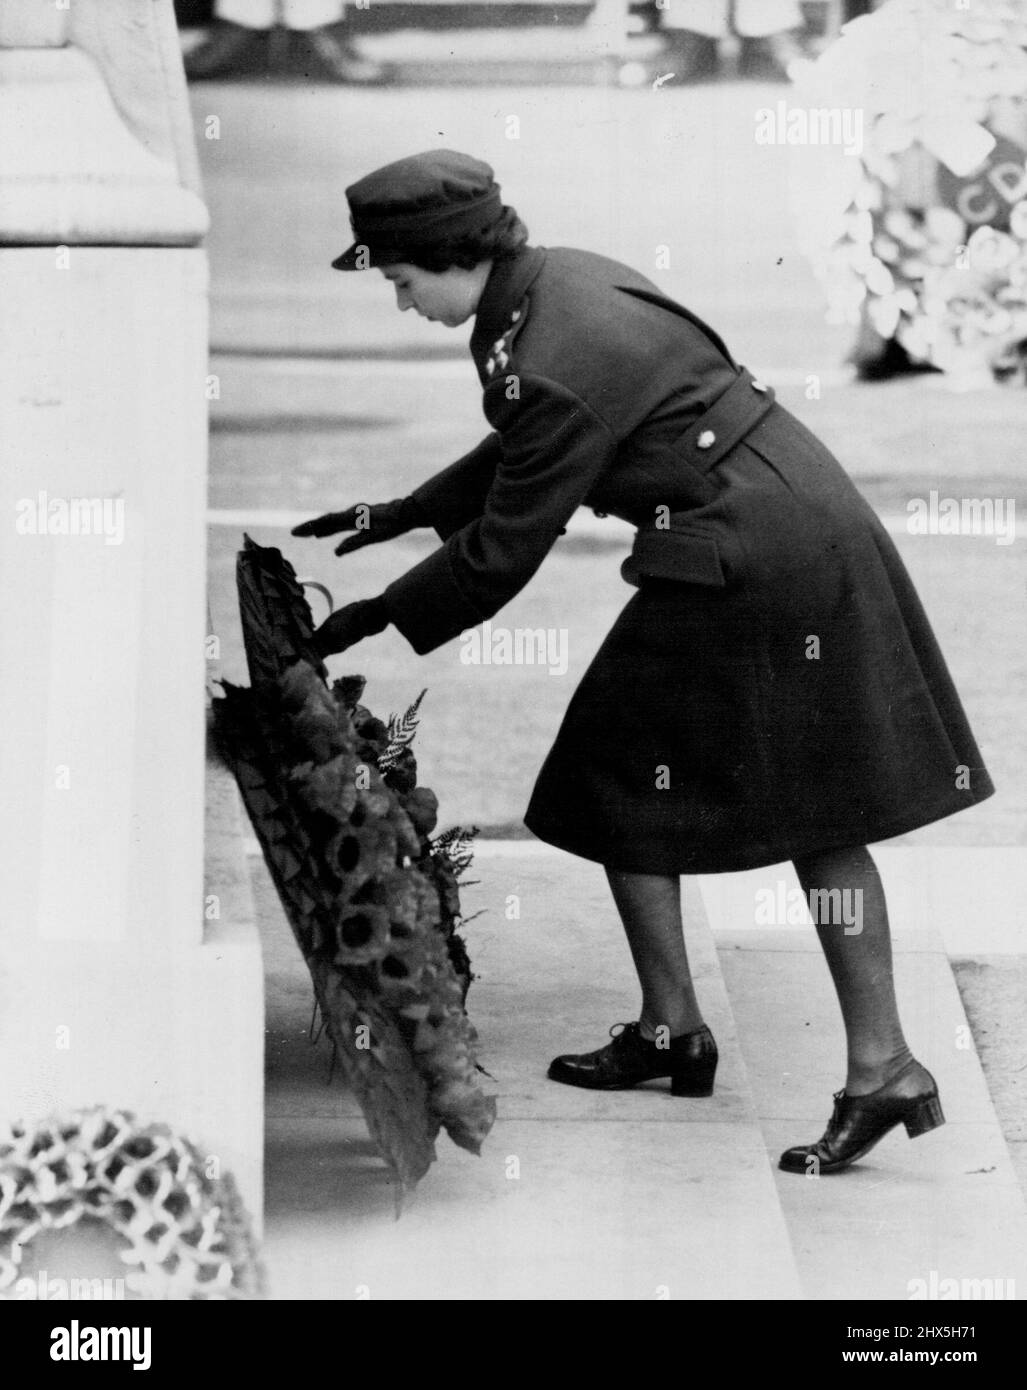 Princess Places Her Wreath on Cenotaph. Princess Elizabeth, in W.R.A.C. uniform placing her wreath on the Cenotaph today (Remembrance Sunday). Beneath an autumn sun breaking through mist, the King, accompanied by Princess Elizabeth and the Duke of Gloucester, led the nation's homage to the dead of two world wars in solemn, impressive ceremonial at the Cenotaph, in Whitehall, London, to-day. (Remembrance Sunday). November 6, 1949. (Photo by Reuterphoto). Stock Photo